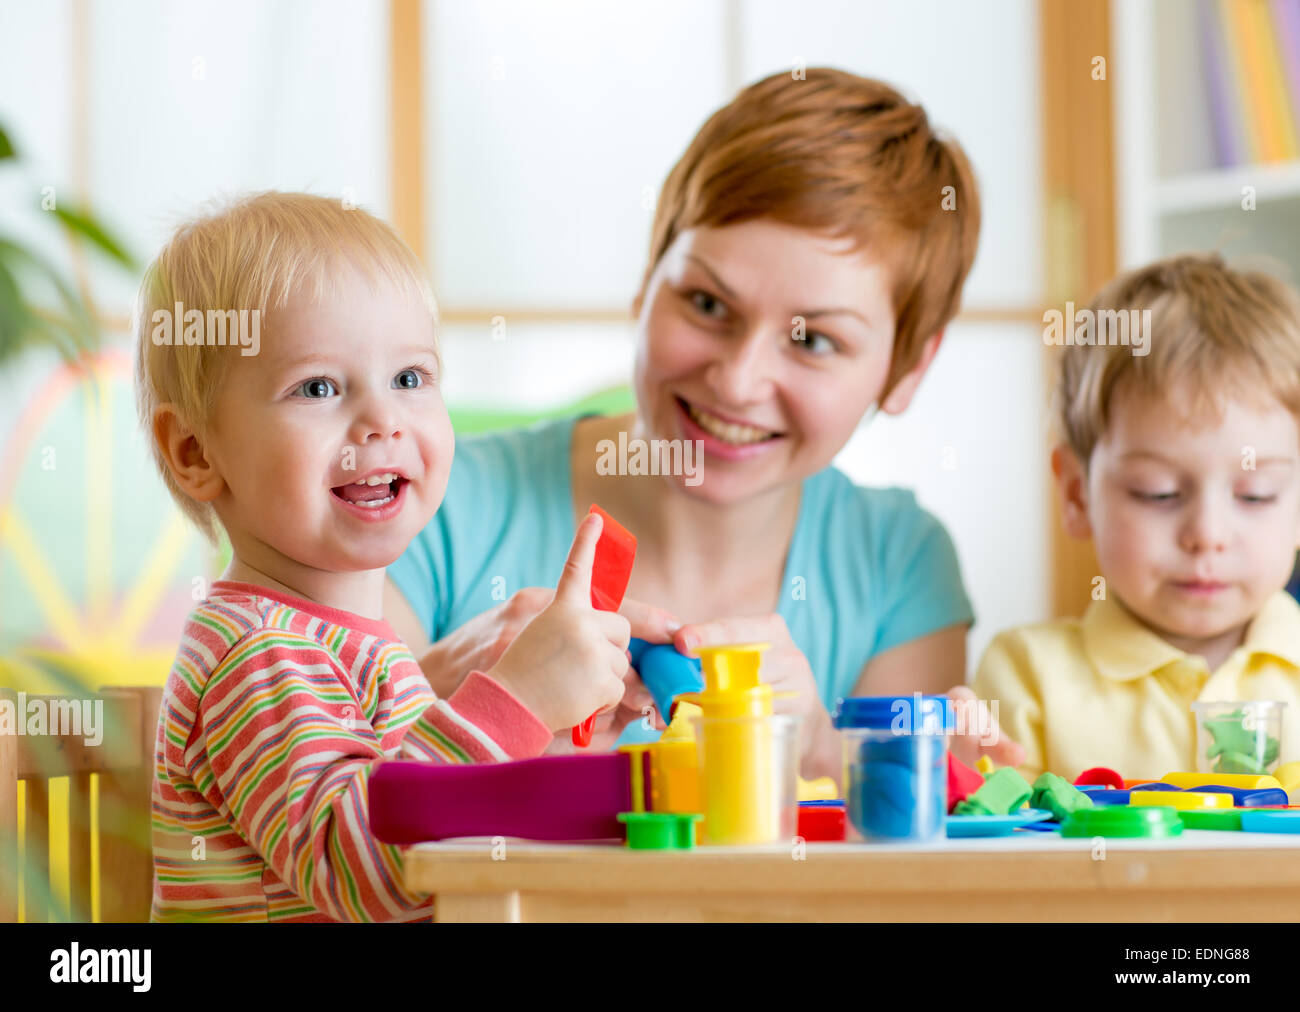 woman playing and teaching with children Stock Photo